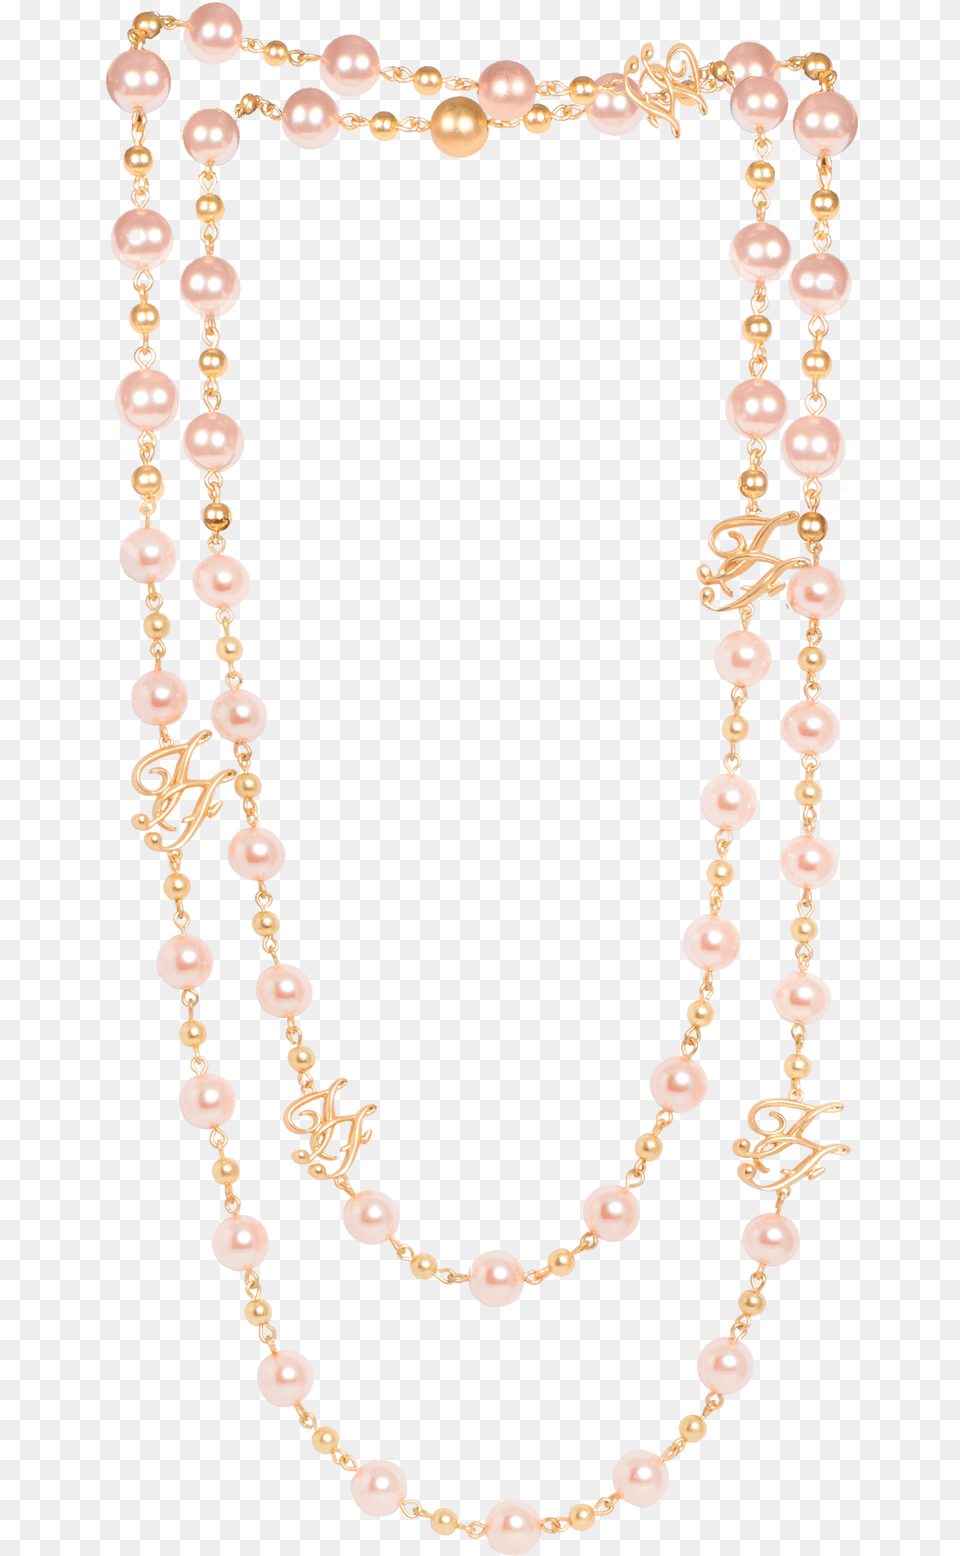 Pink Pearl Necklace Amp Bracelet With Faux Pearls Necklace, Accessories, Bead, Bead Necklace, Jewelry Png Image